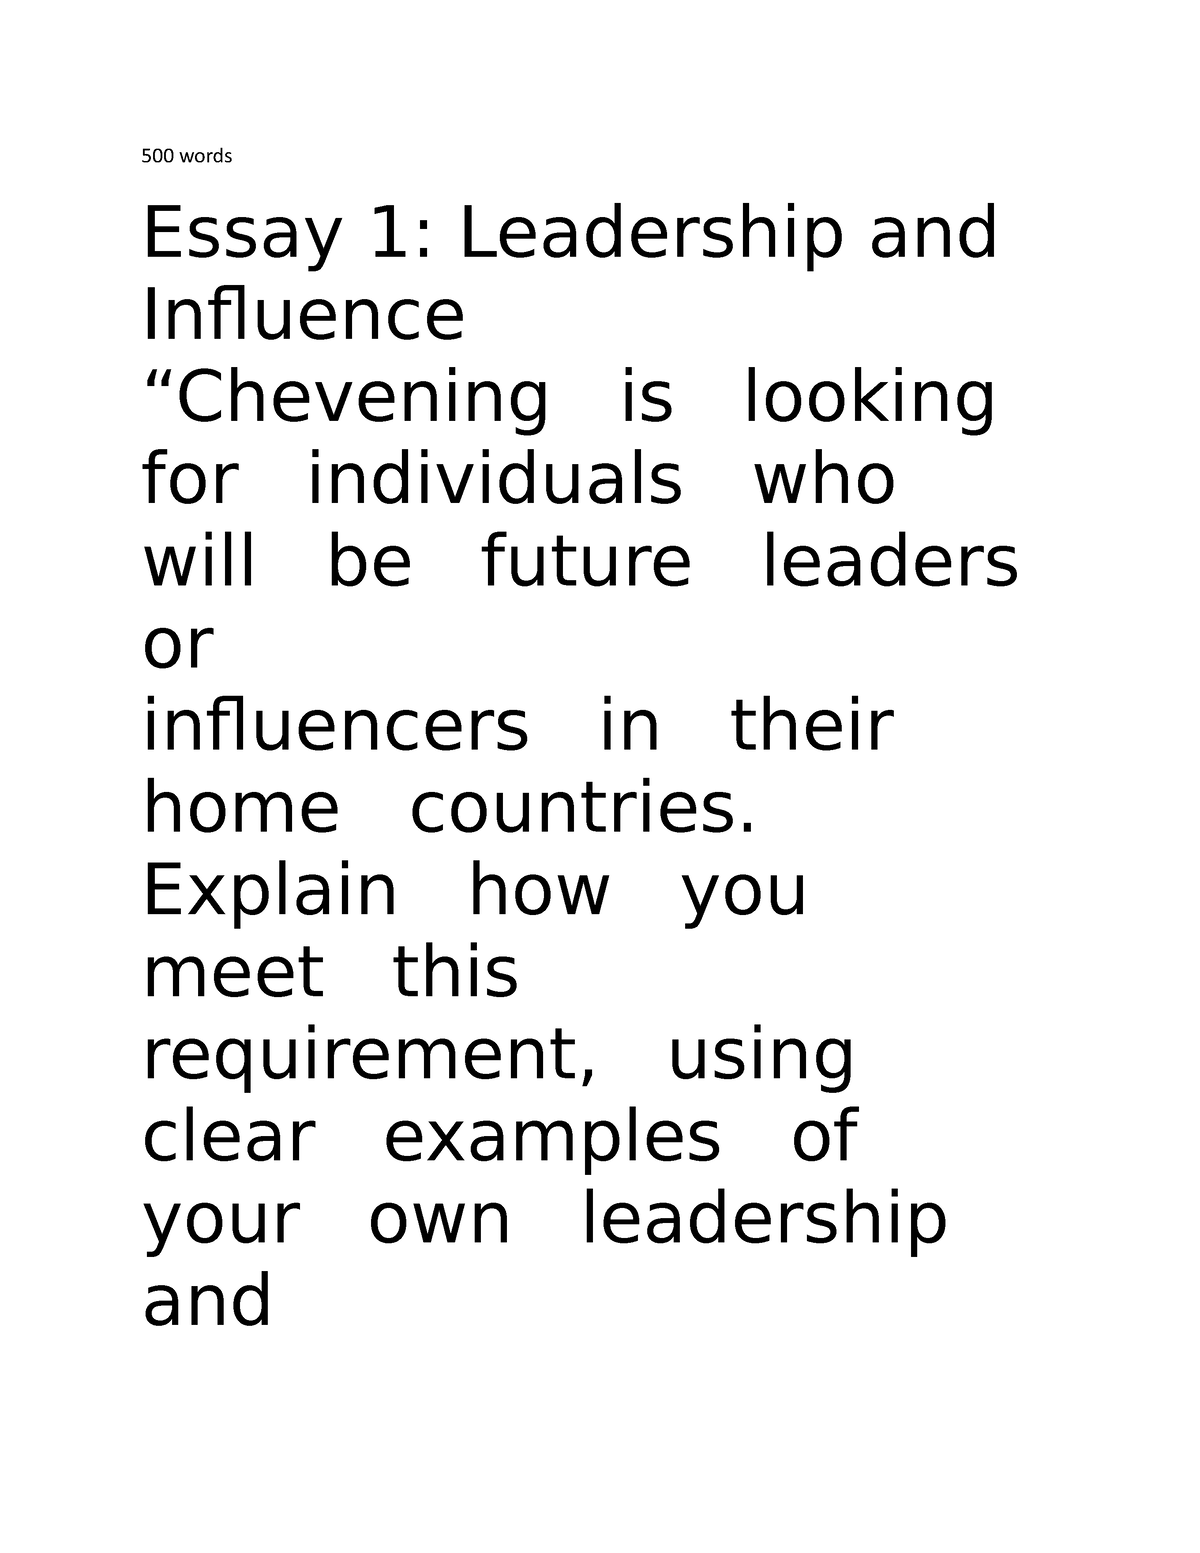 leadership and influence essay for chevening